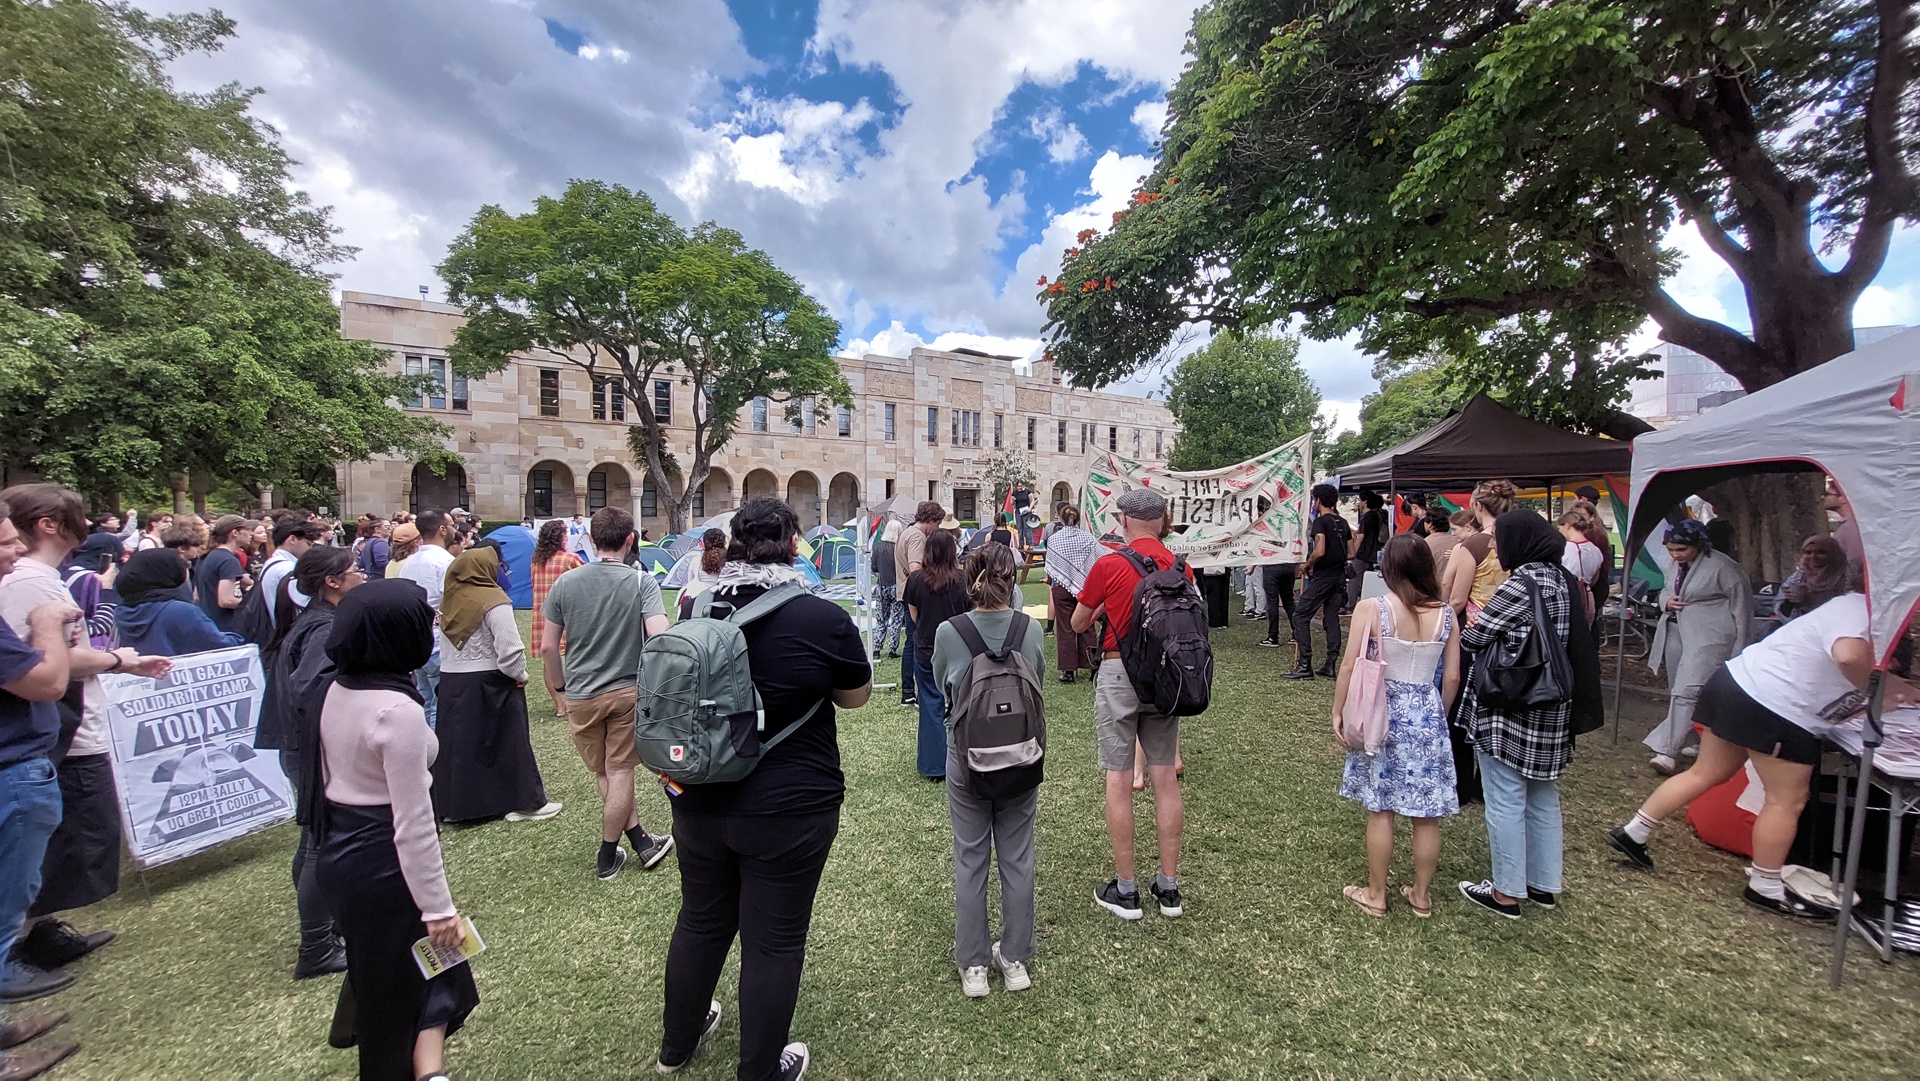 Students gather before marching to protest Albanese